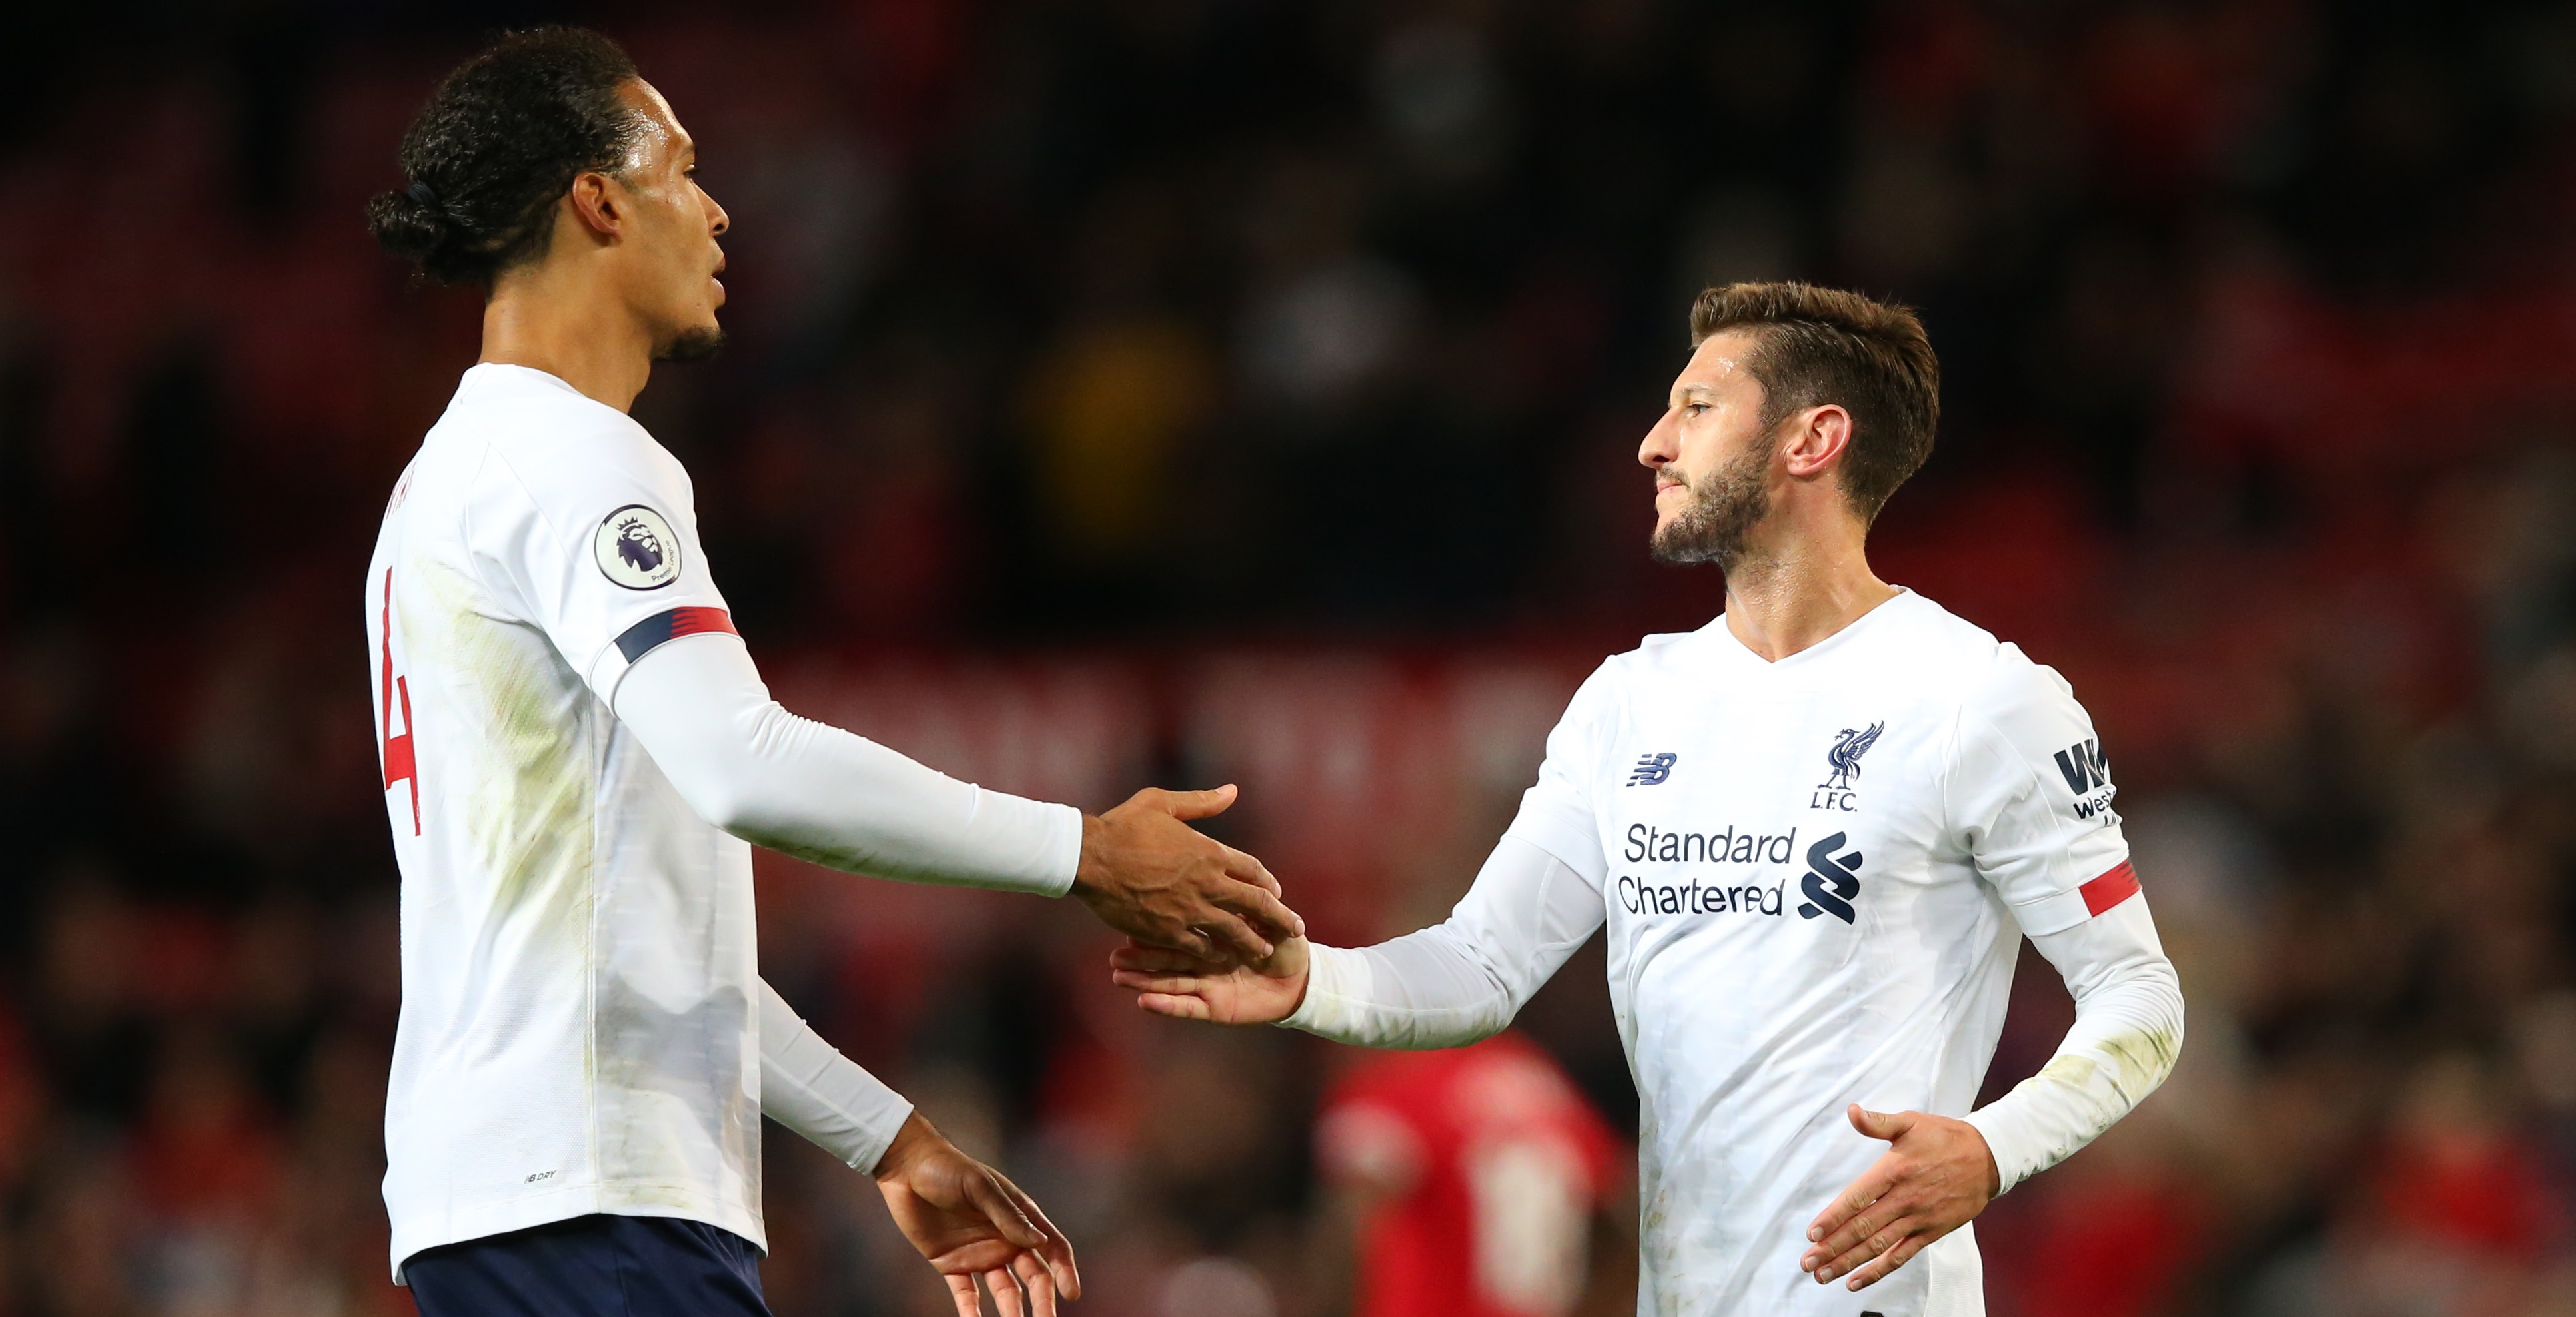 Sepp van den Berg reveals crucial role Van Dijk and ex-Red Lallana played in helping him settle at Liverpool